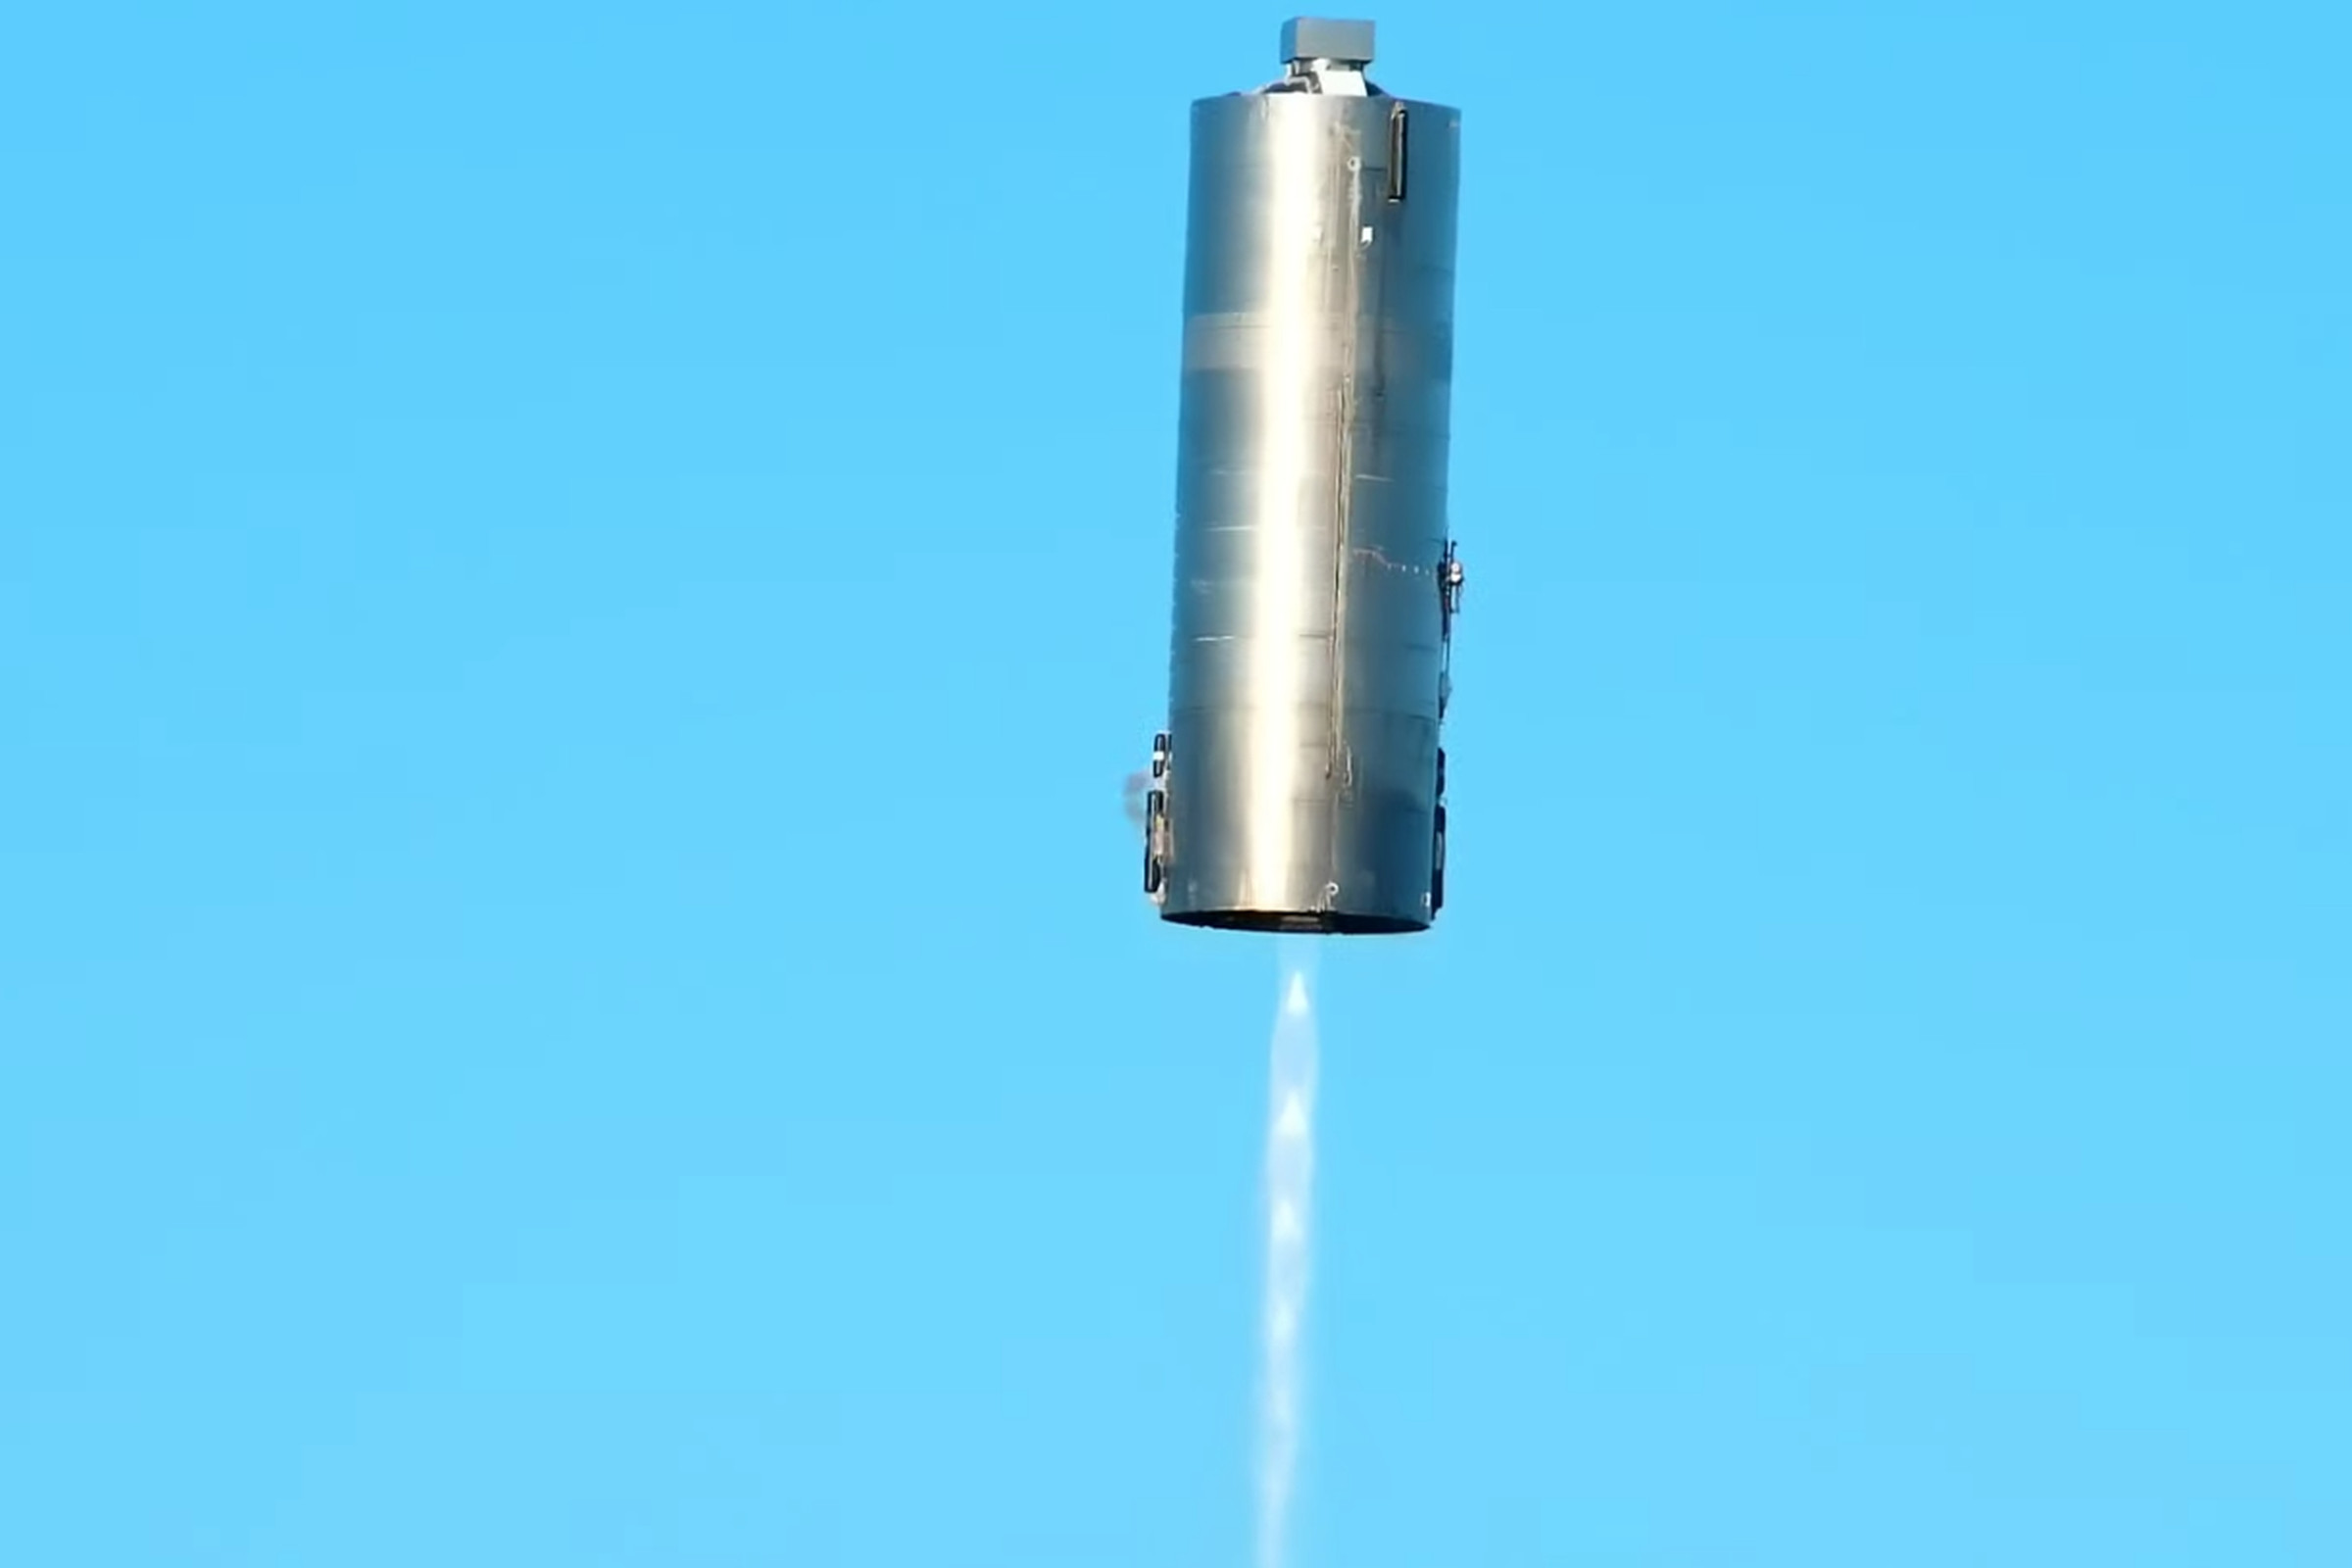 SpaceX’s Starship prototype during the test hop, recorded by LabPadre’s livestream